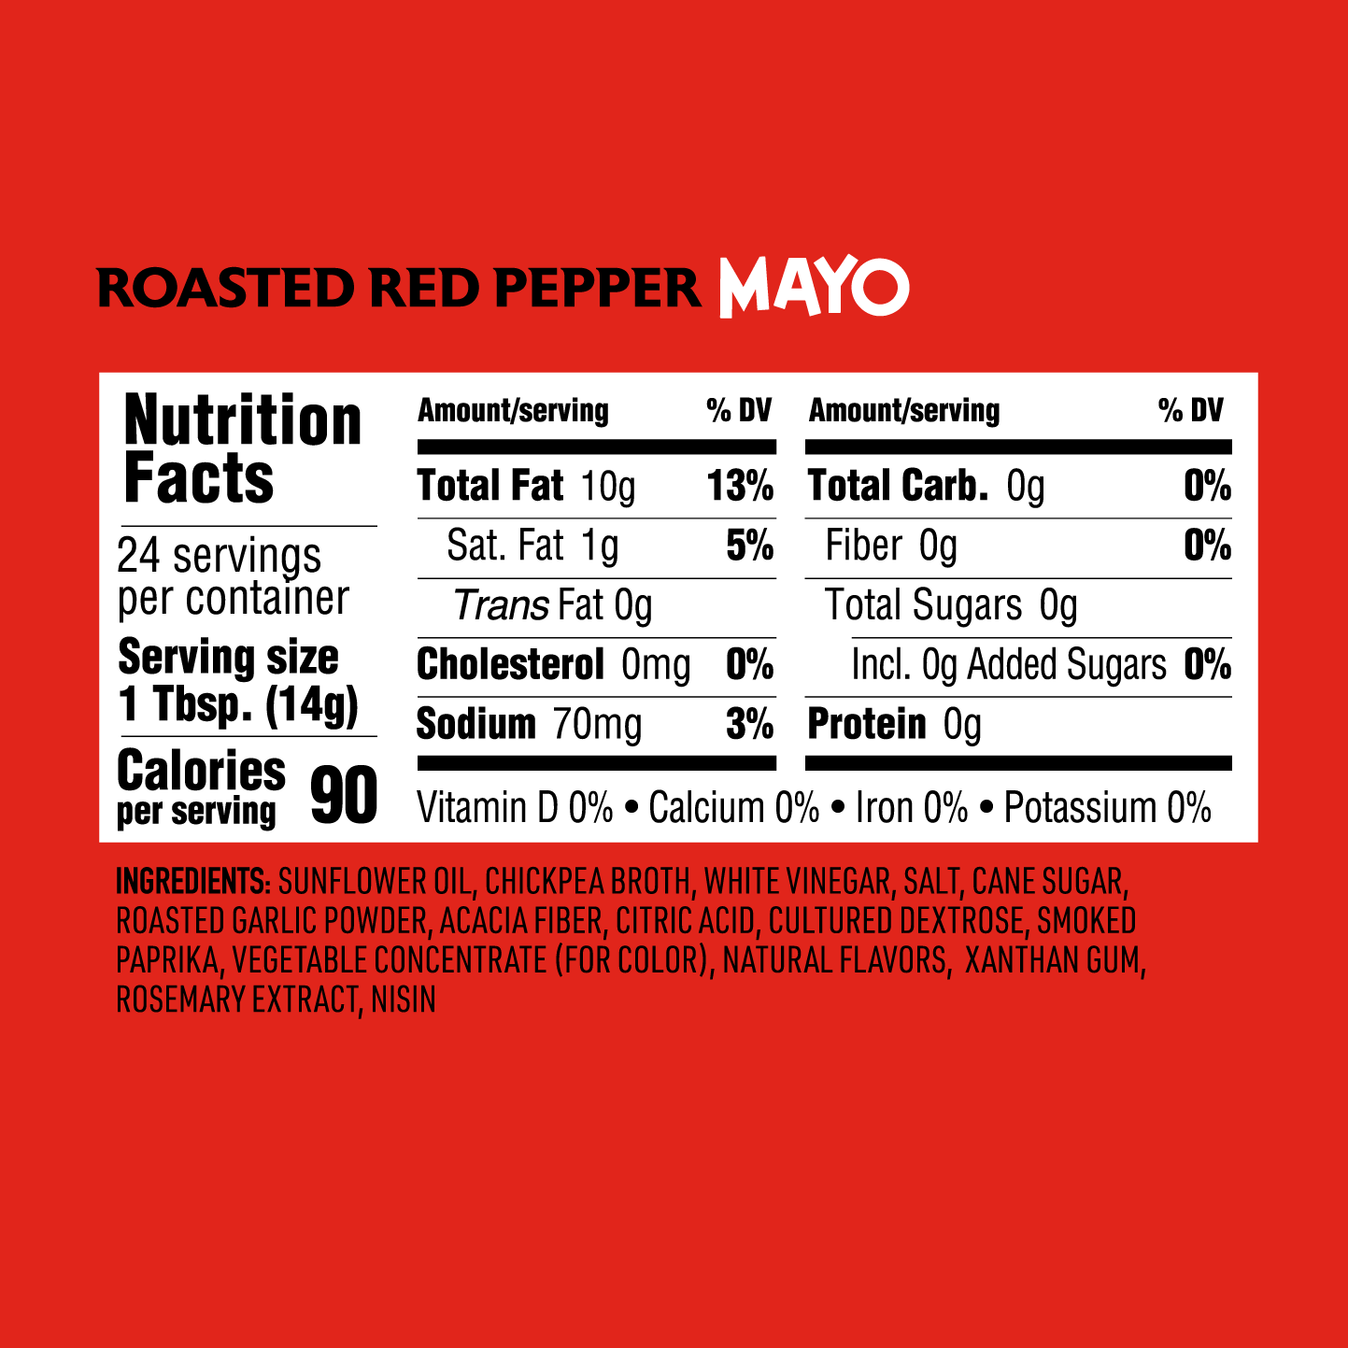 Nutrition facts for O'dang Foods brand Roasted Red Pepper Vegan Mayo made with chickpeas and sunflower oil. Carb free, cholesterol free, clean label.